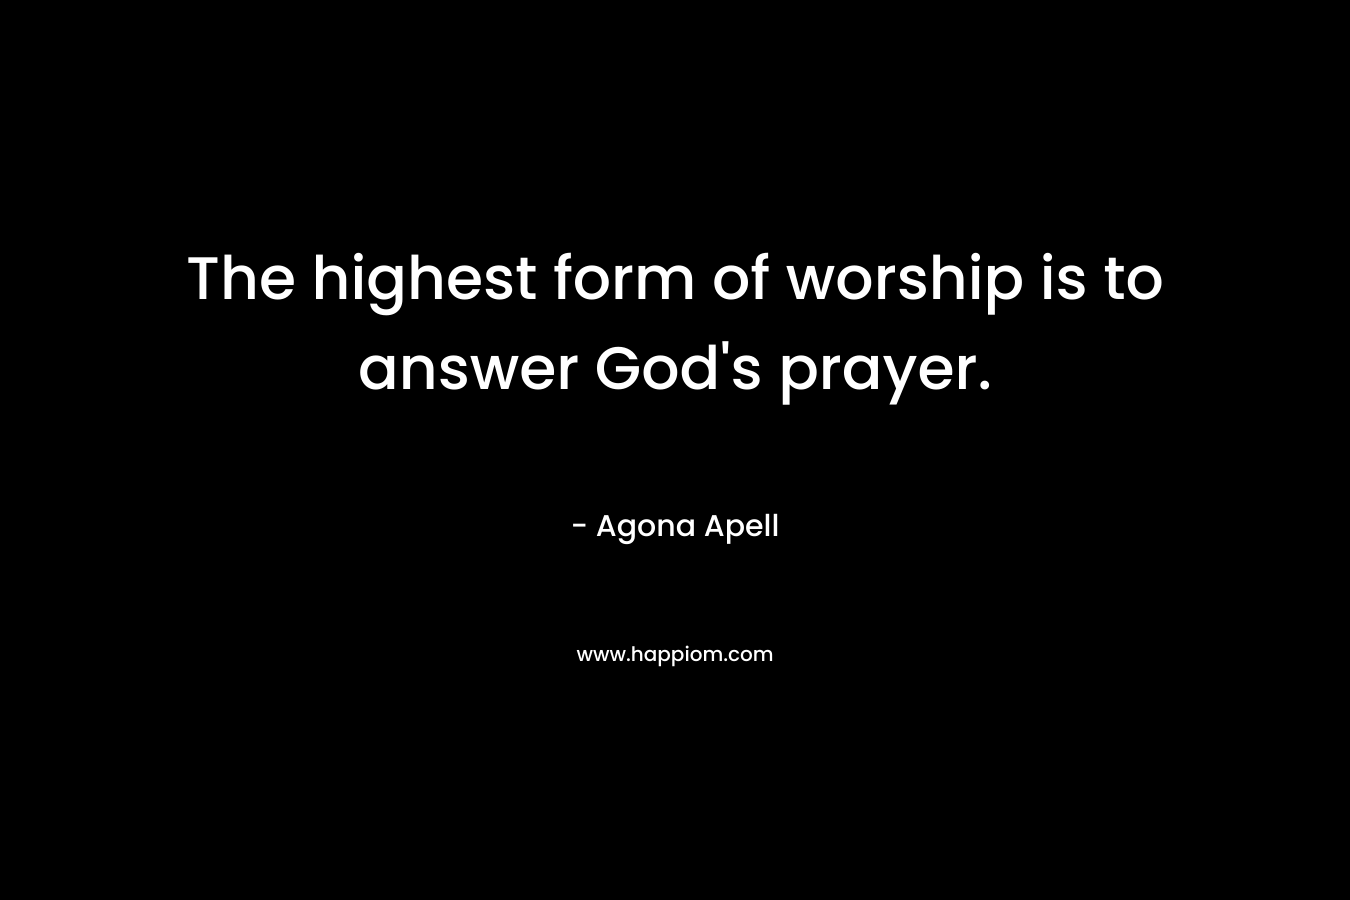 The highest form of worship is to answer God’s prayer. – Agona Apell